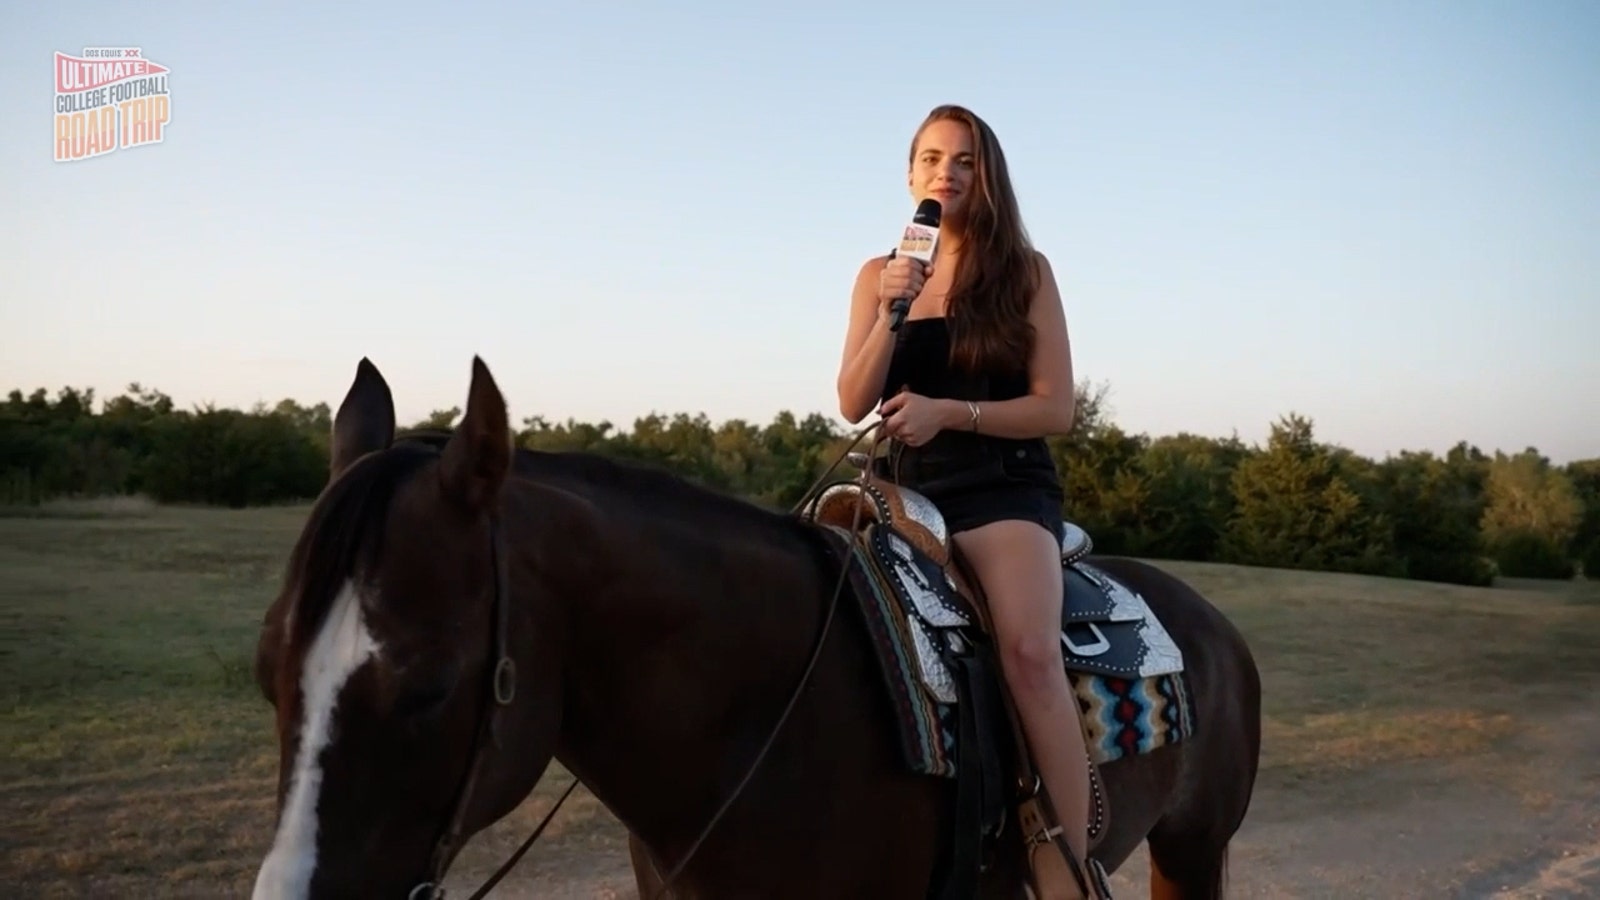 Charlotte Wilder meets Oklahoma's most famous ponies ' Ultimate College Football Road Trip